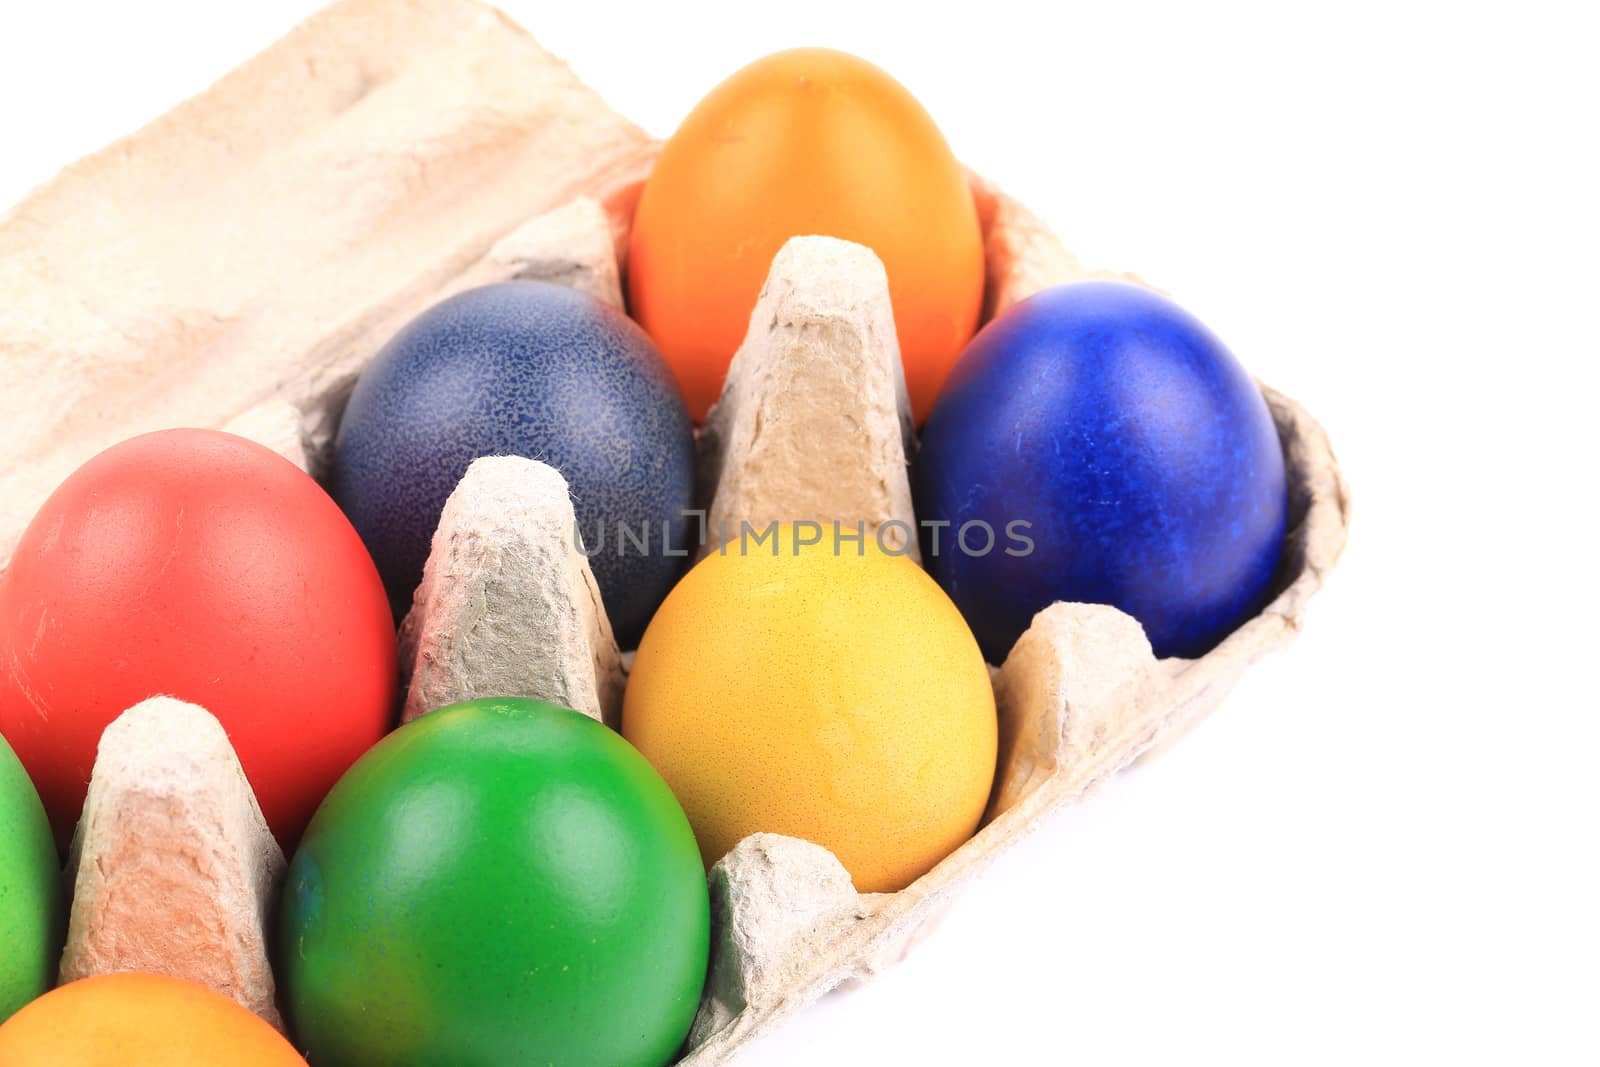 Cardboard box with Easter colored eggs. by indigolotos